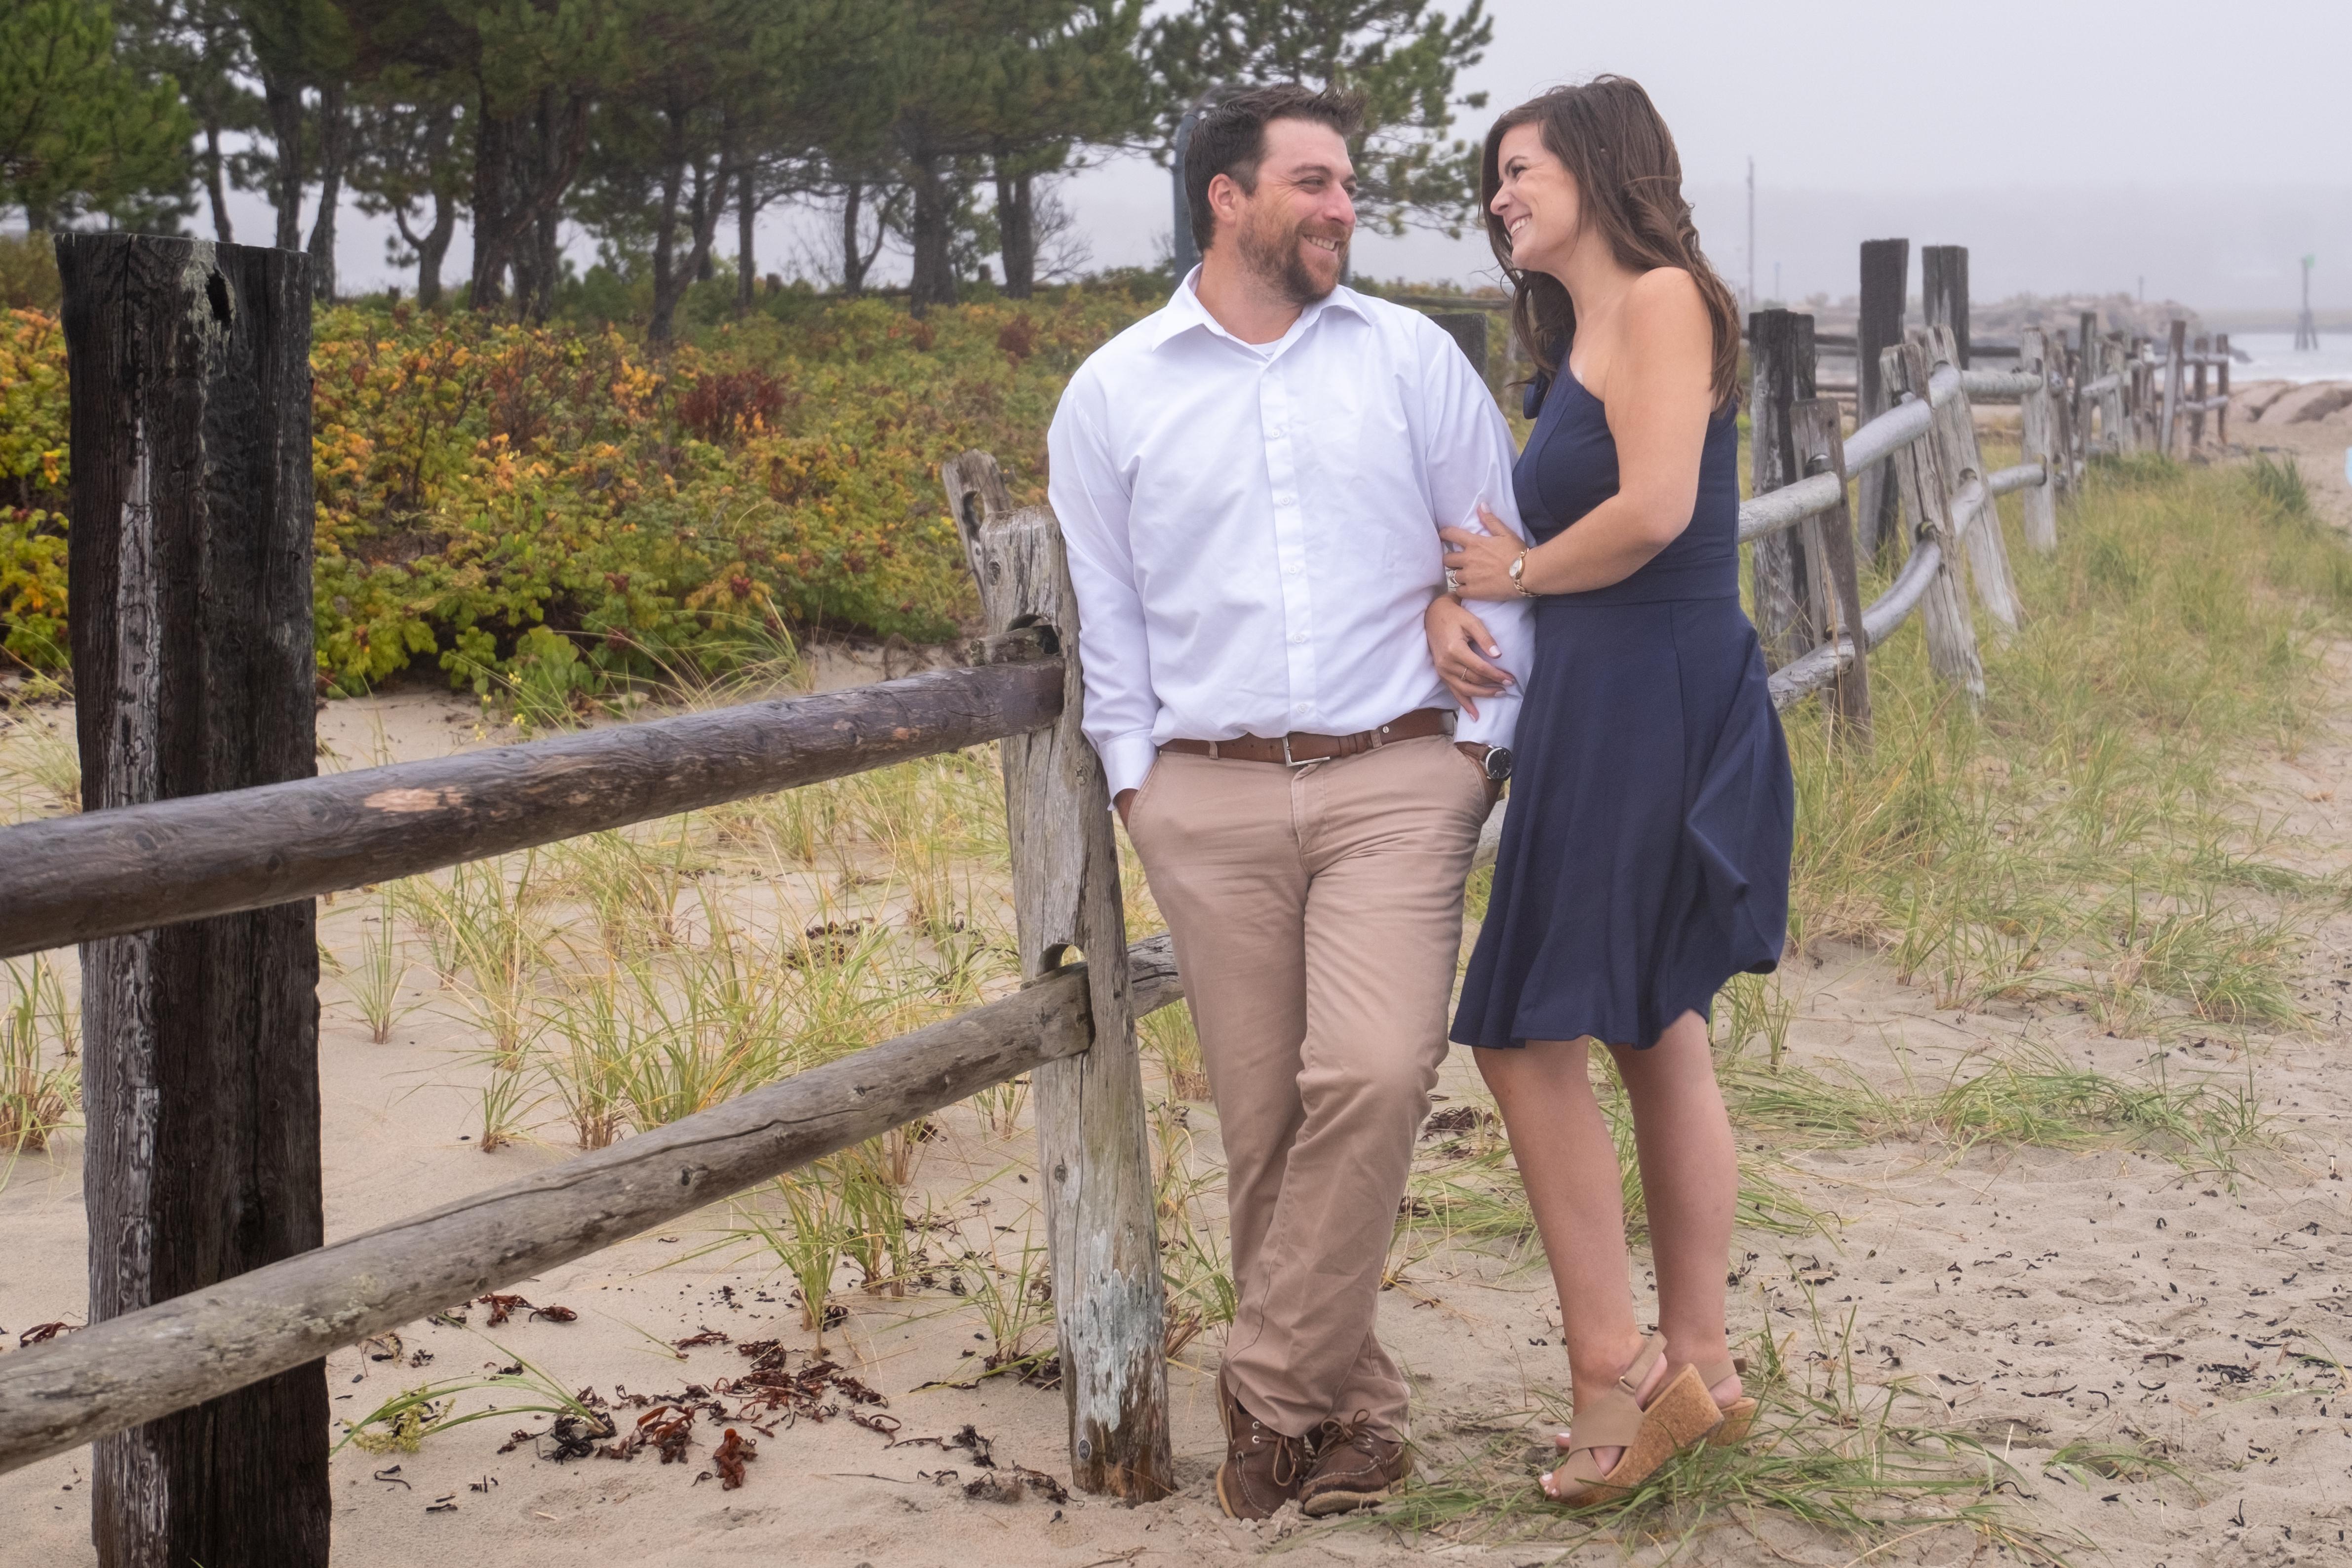 The Wedding Website of Kimberly Chapin and James Amato